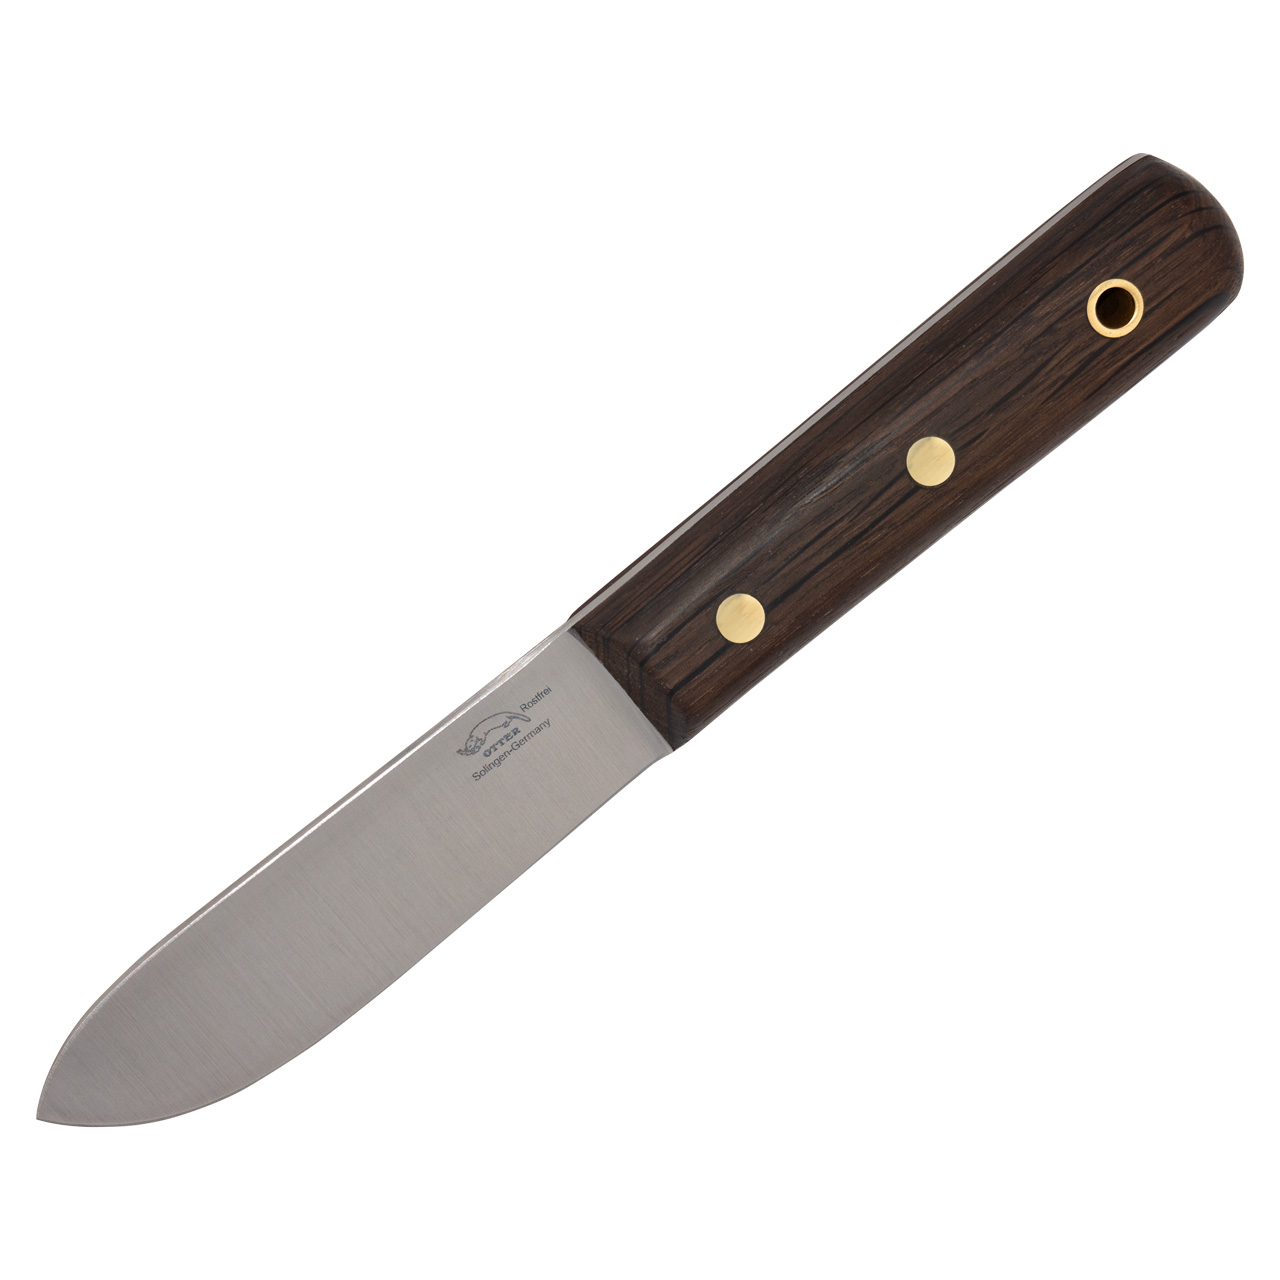 OTTER sailor's/boat knife compact